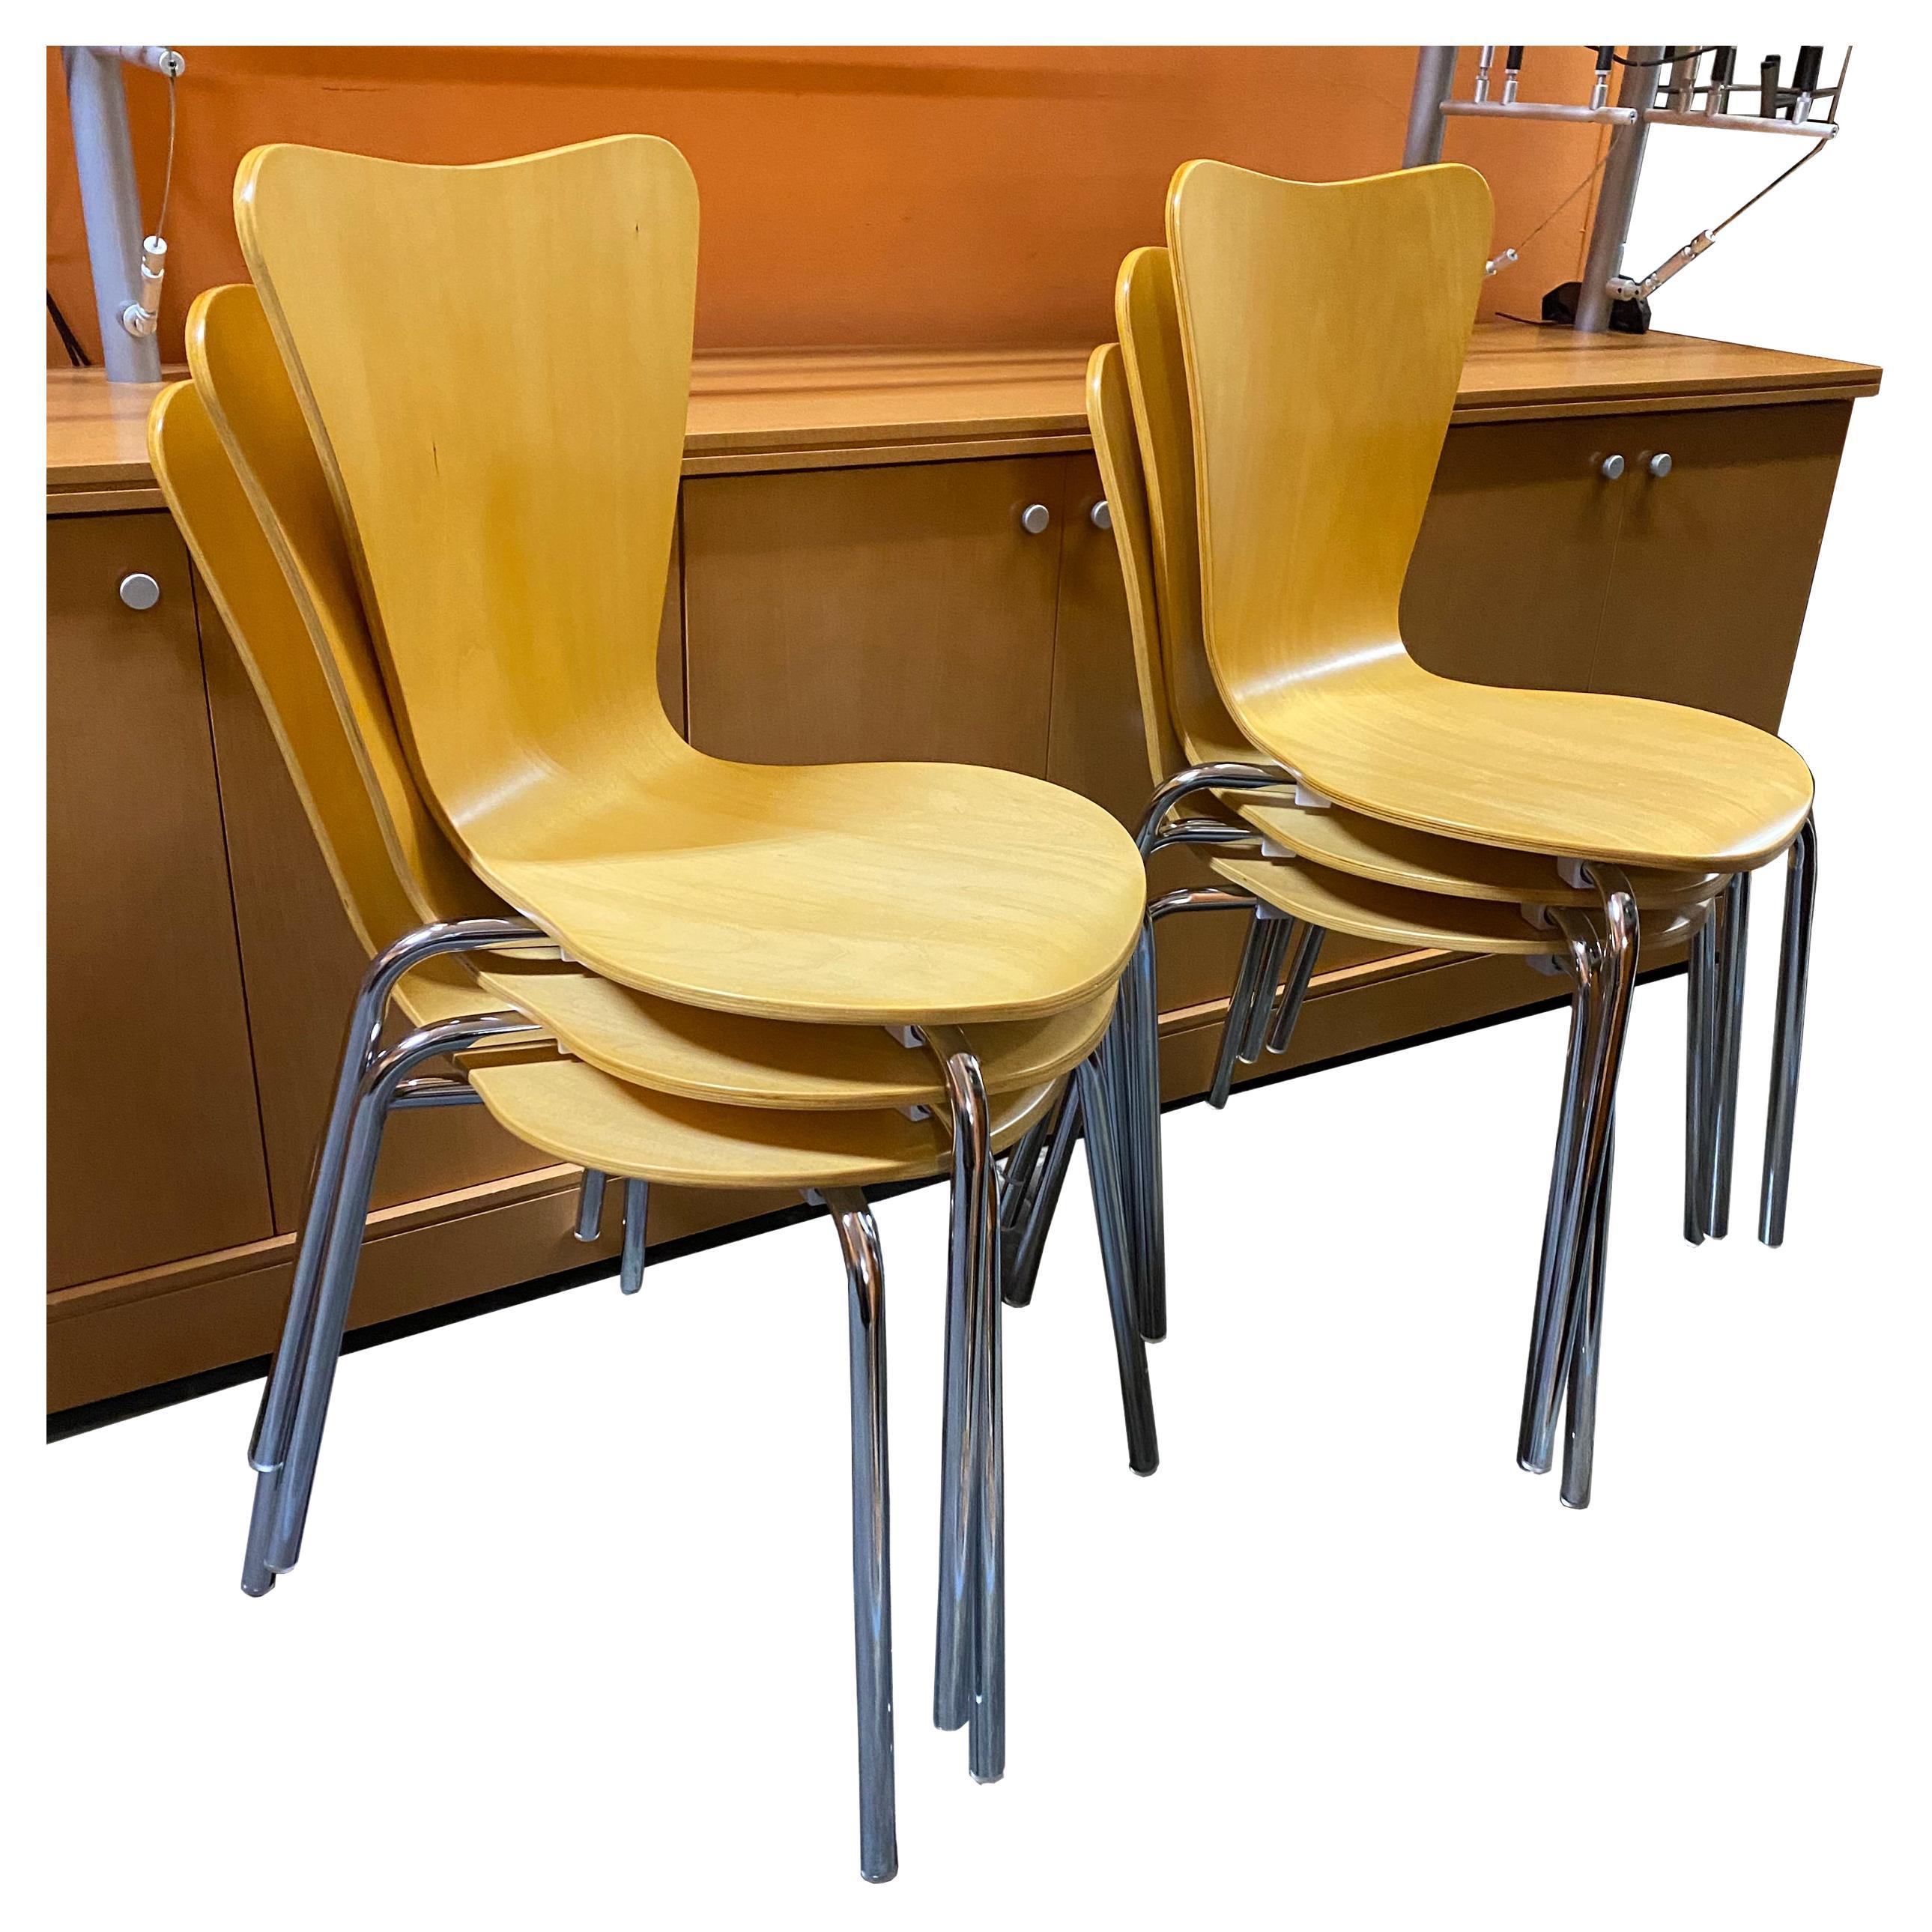 KFI Stackable side chair

Contemporary molded dining chair with steel frame. Polyurethane glides to help protect floors from damage. Stacks 5 high for easy storage and transportation.

20 available.
Overall Dimensions: 18